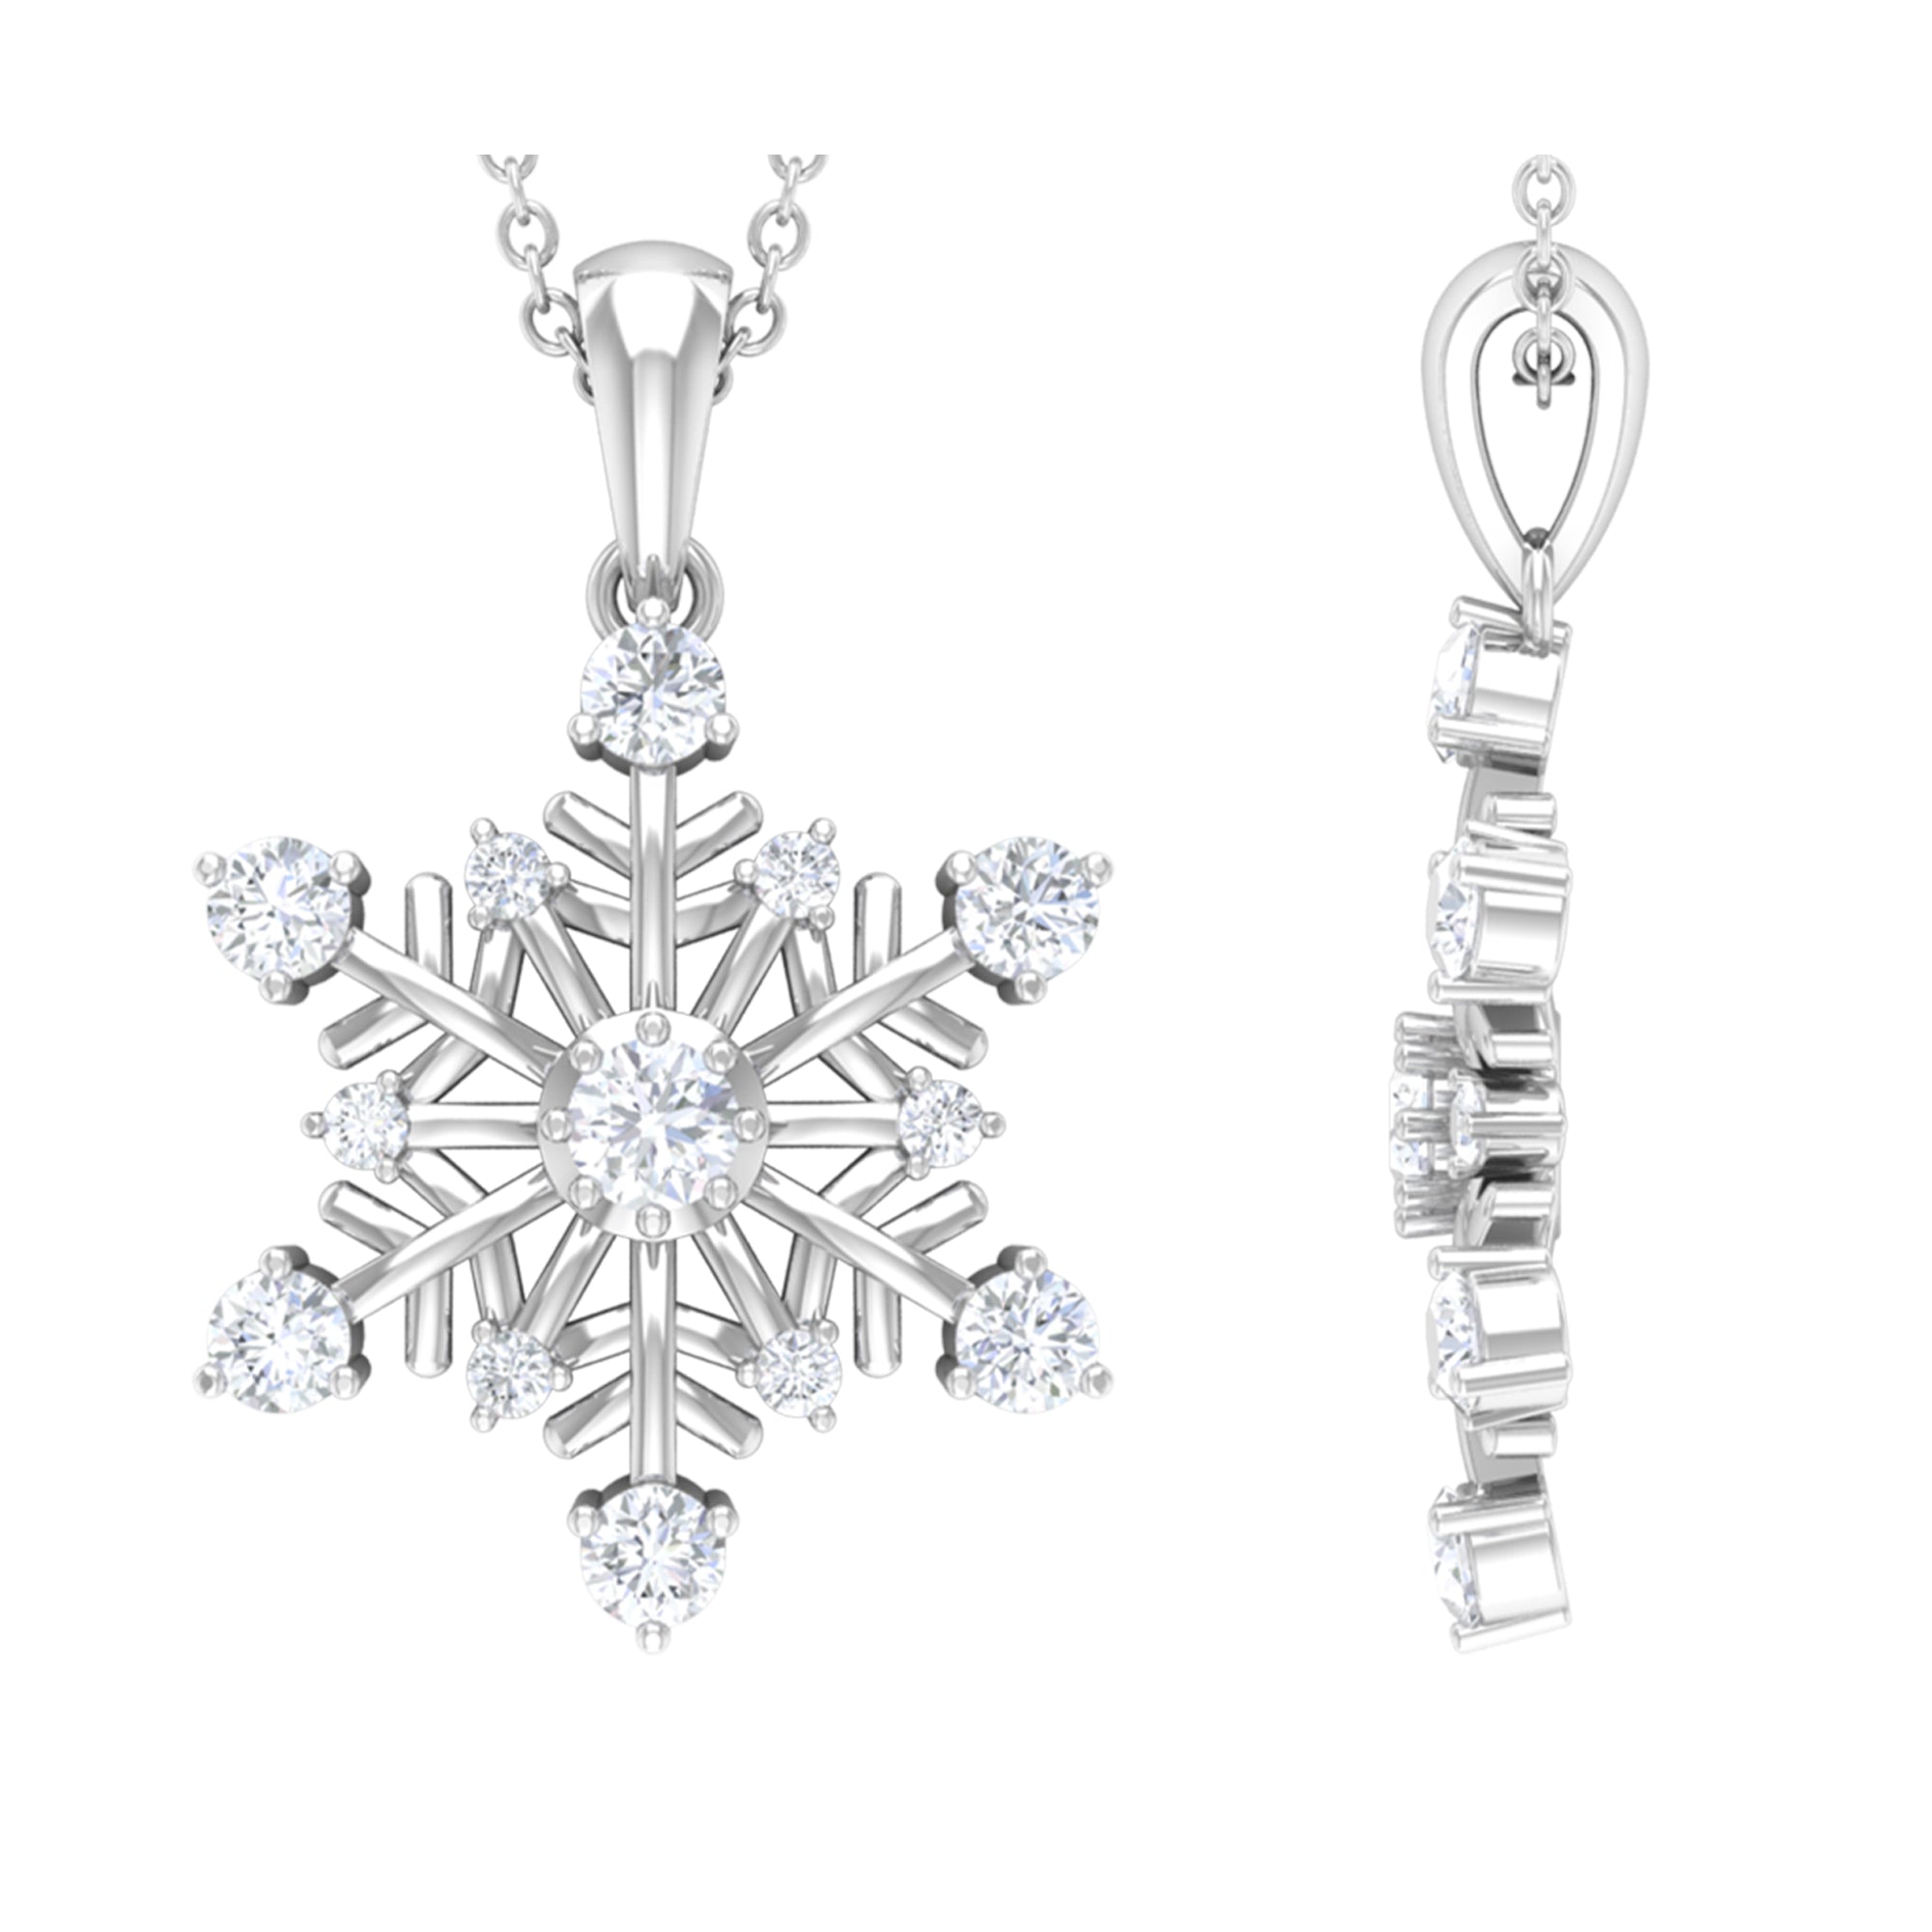 Classic Certified Moissanite Snowflake Pendant in Silver - Rosec Jewels